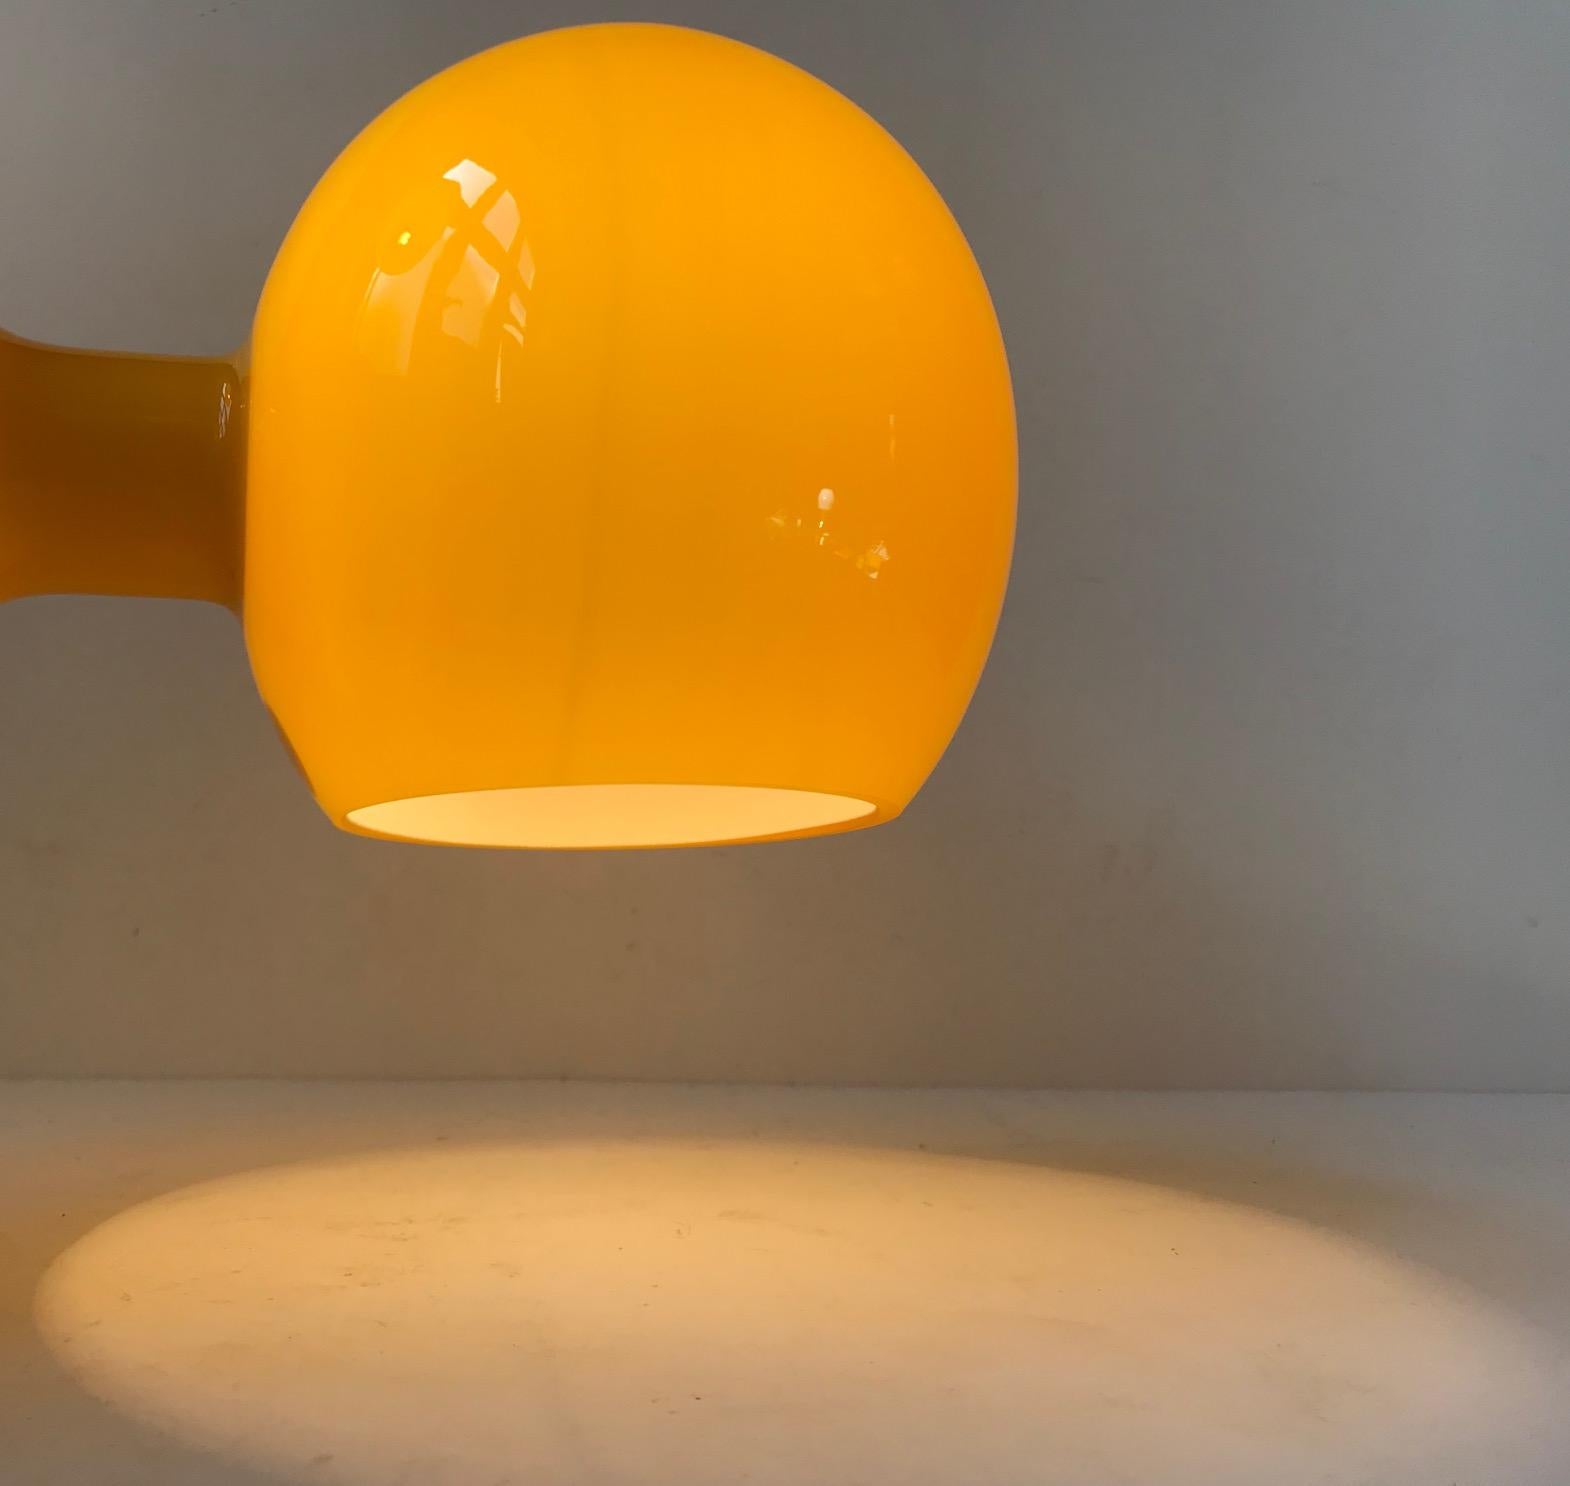 - Bright yellow glass table or wall Lamp, model Astronaut, designed by Michael Bang 
- Manufactured by Holmegaard in Denmark in 1967
- Cased yellow glass exterior and opaline interior
- Light source: E14 / E12 Edison screw fitting, max 40W.